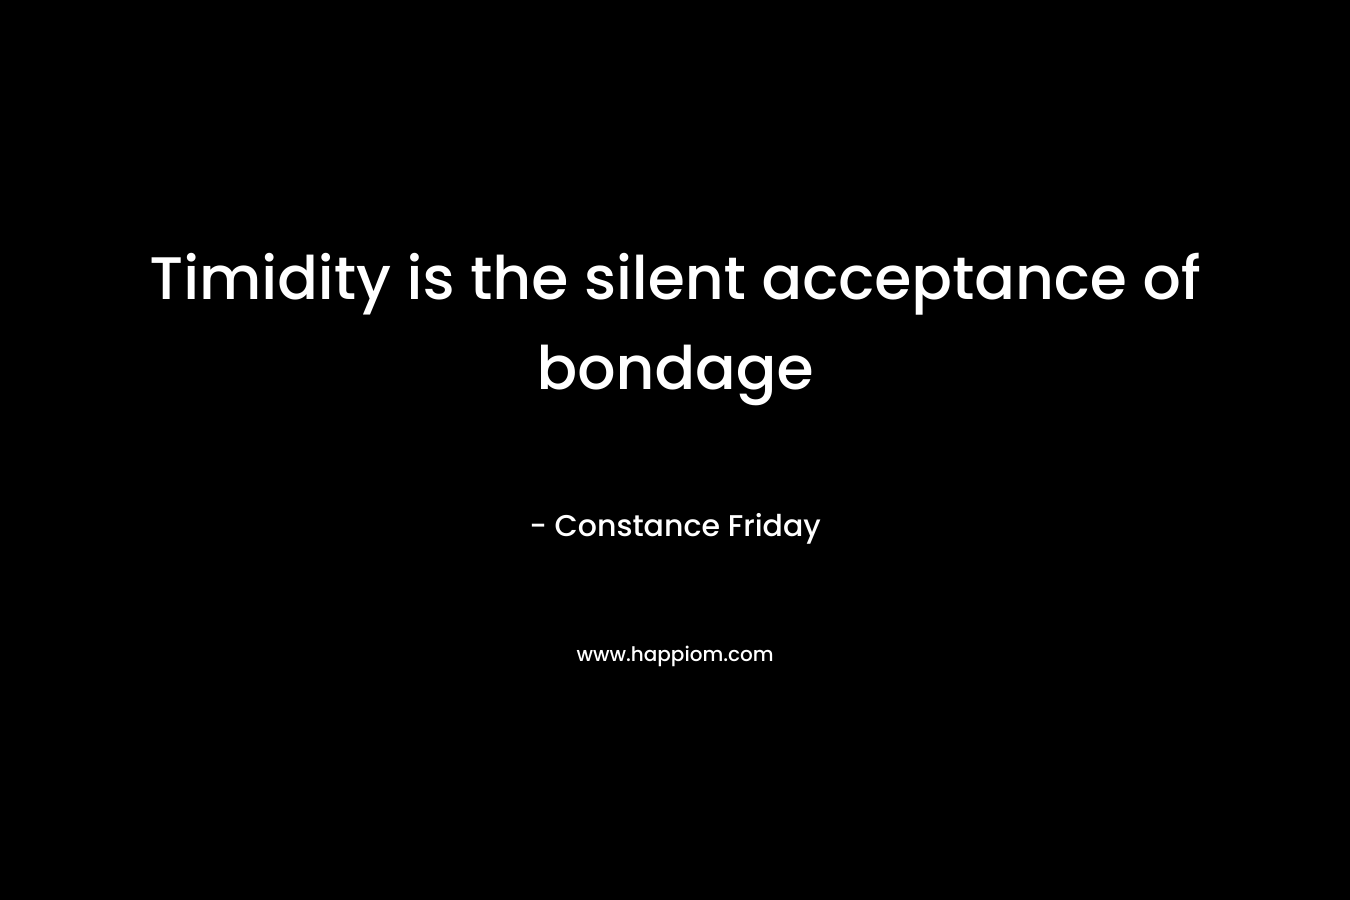 Timidity is the silent acceptance of bondage